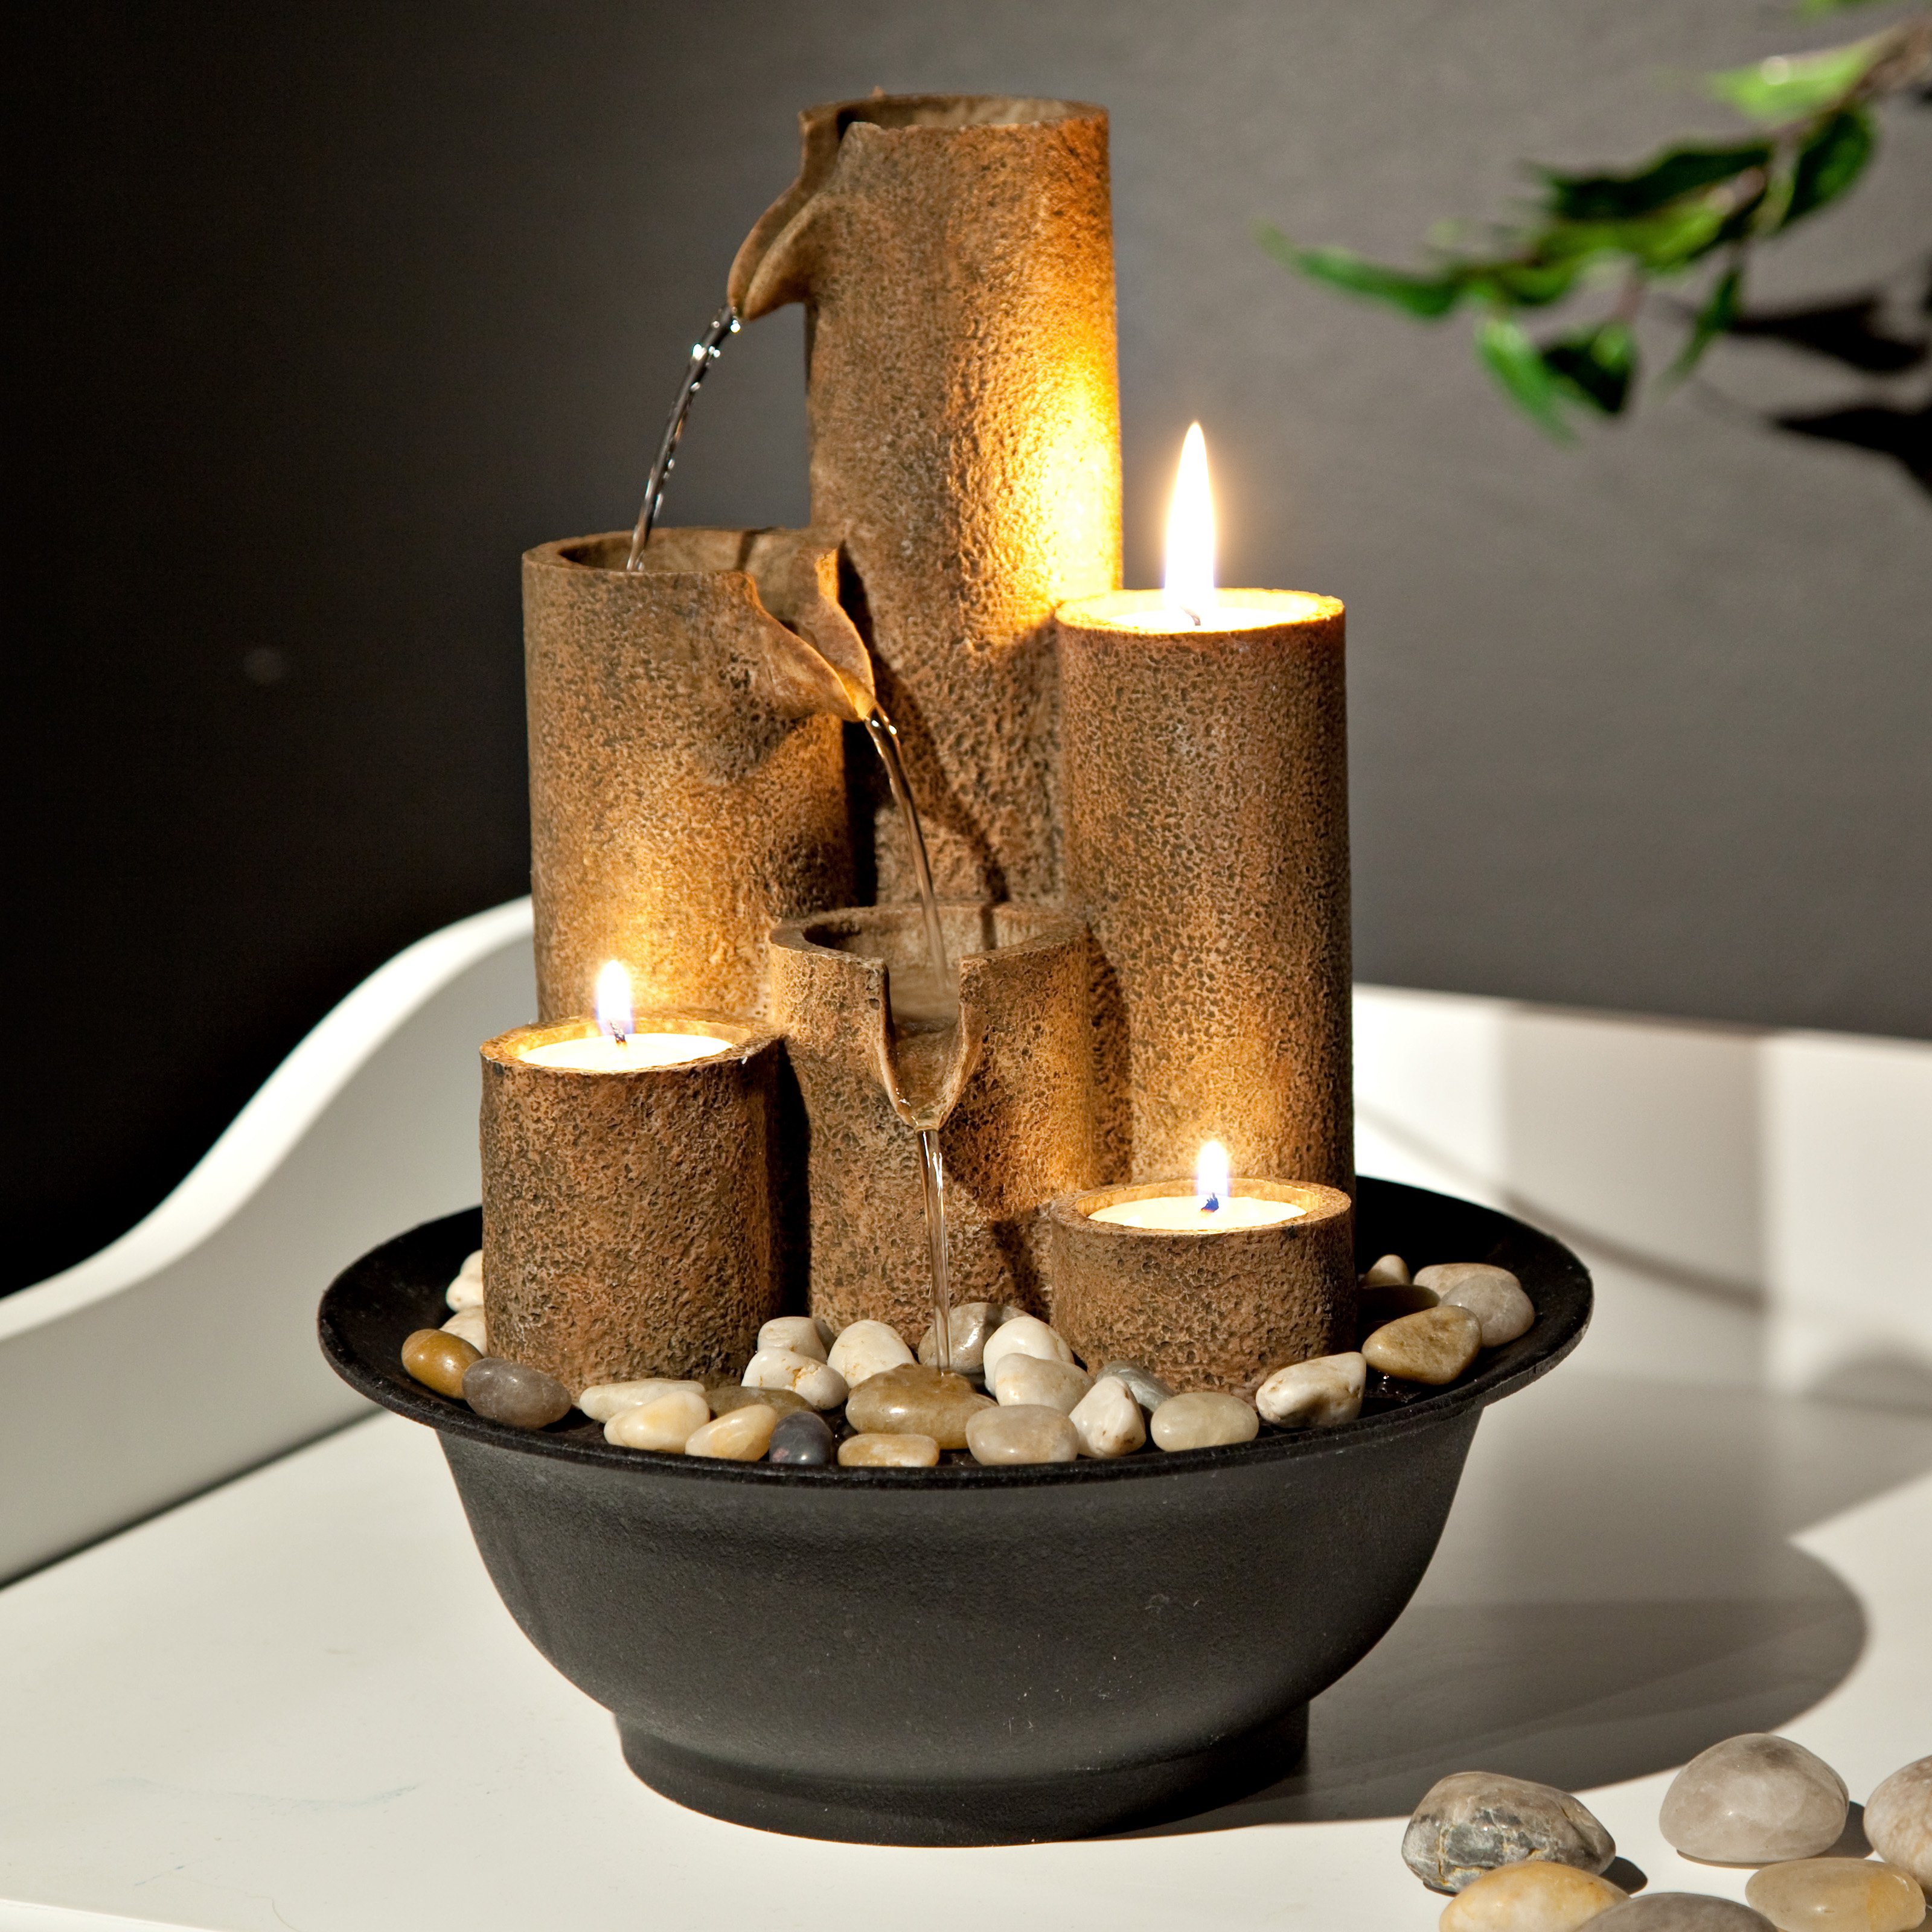 Best Tabletop Fountains